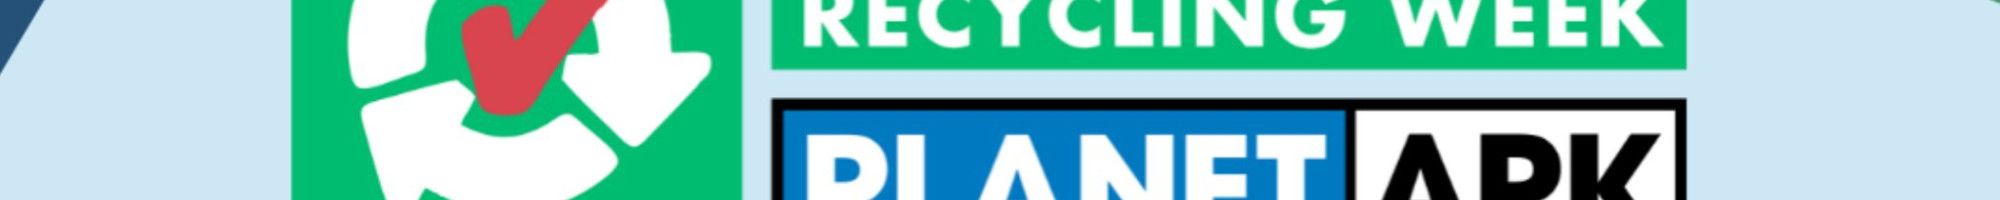 Text reads National Recycling Week Planet Ark 7 to 13 November 2022